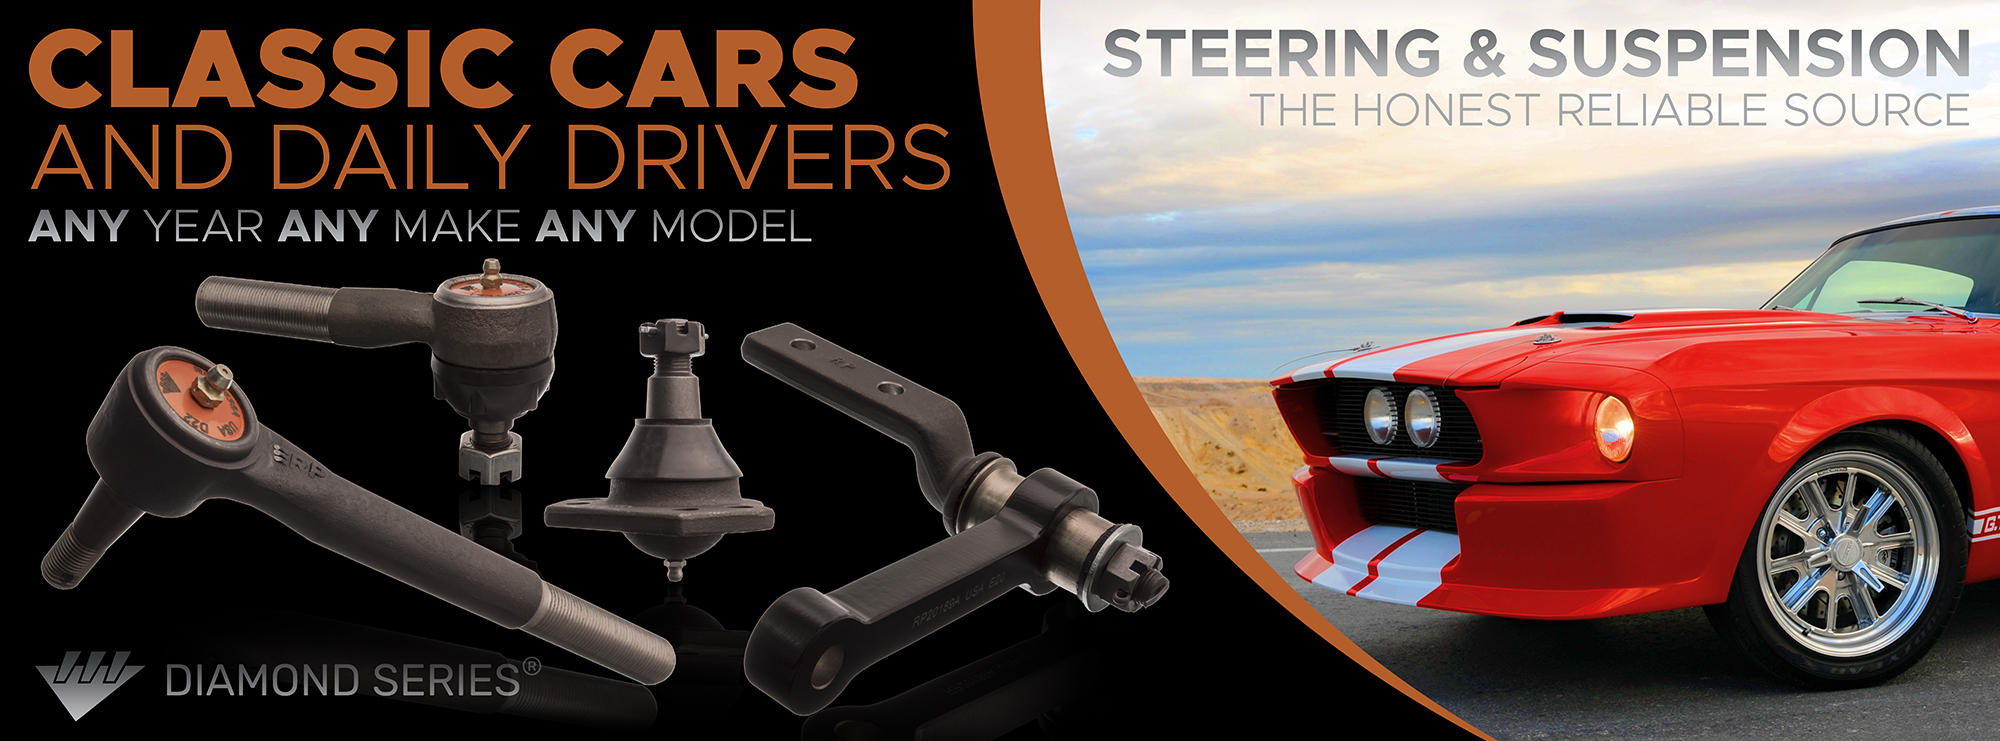 Rare Parts Inc - Steering and Suspension parts for Classic cars, trucks and Imports